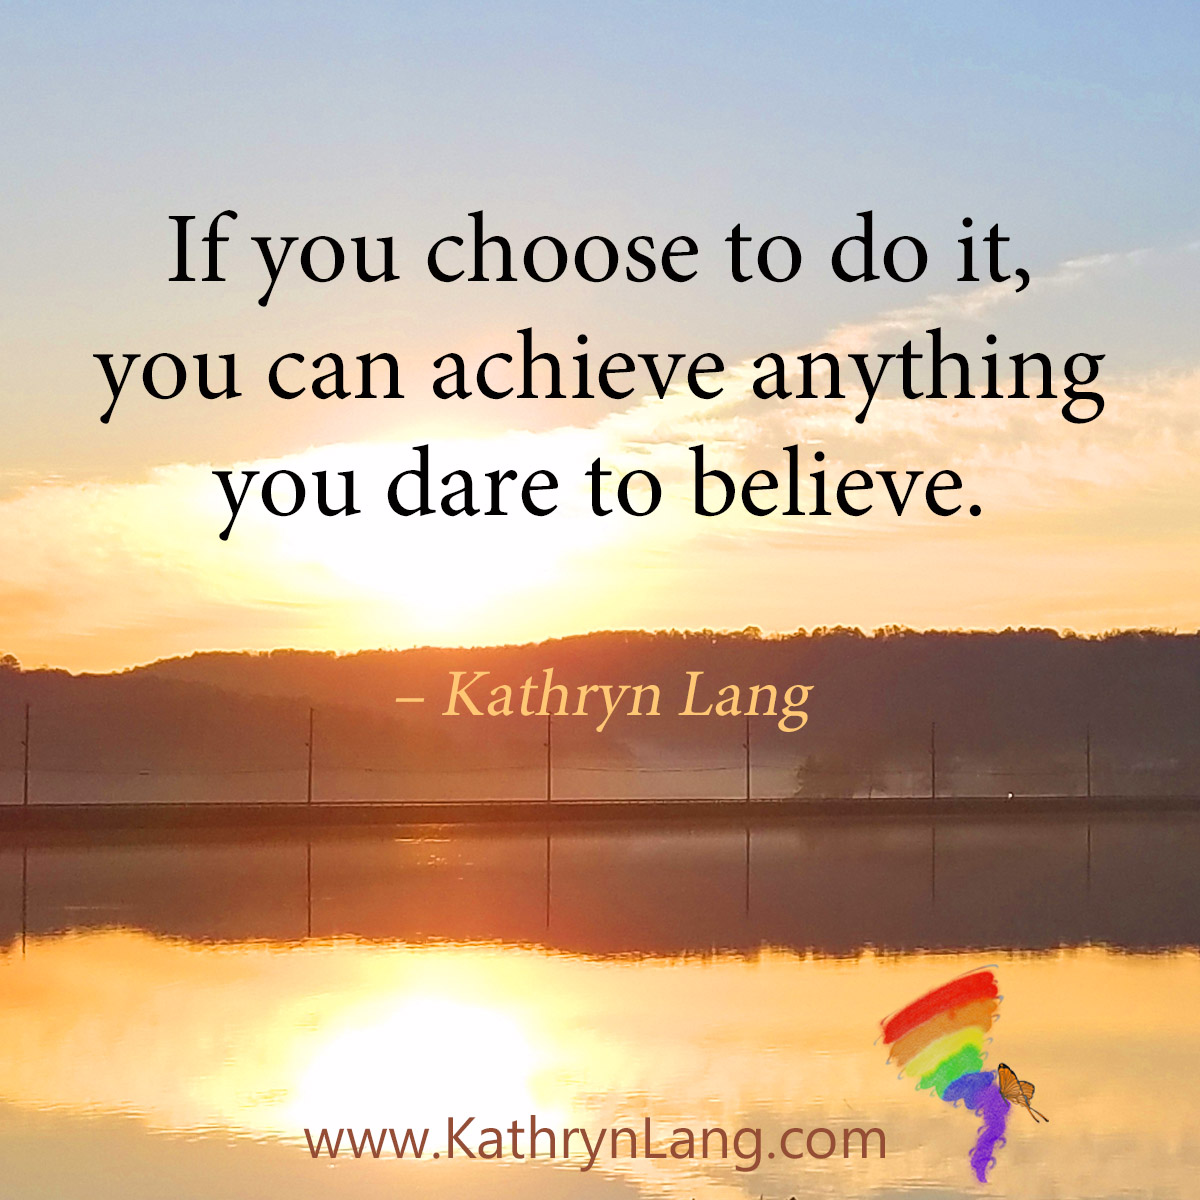 #QuoteoftheDay

If you choose to do it, you can achieve anything you dare to believe.